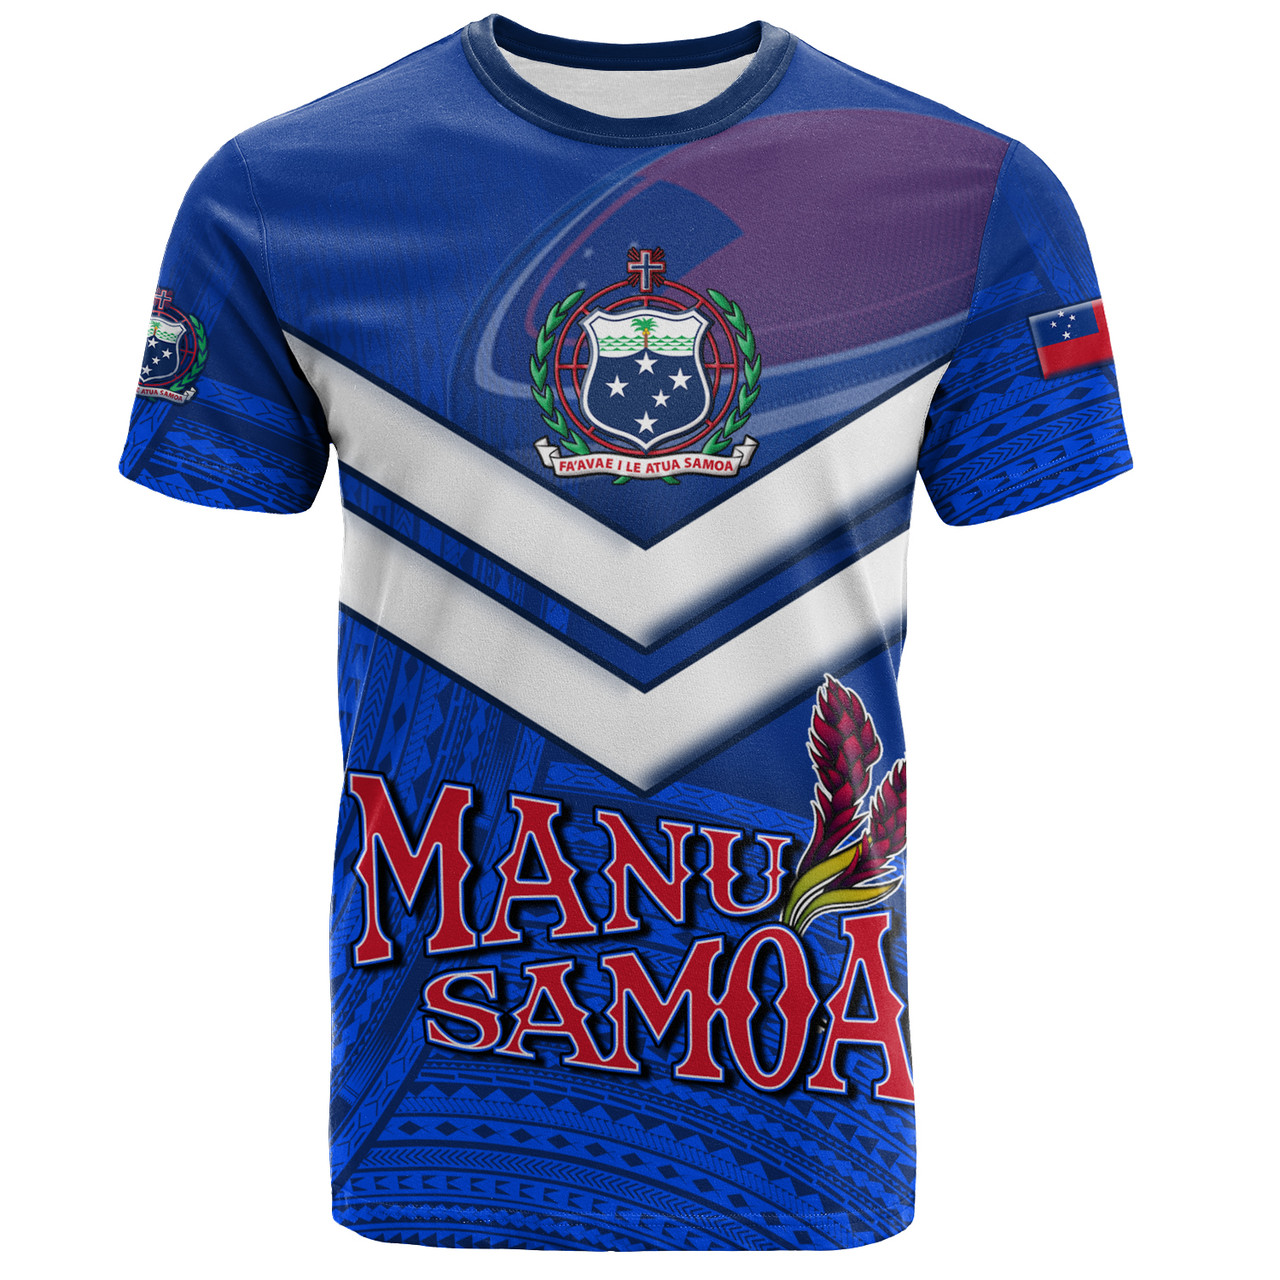 Samoa T-Shirt Samoa Tradition Patterns With Rugby Ball